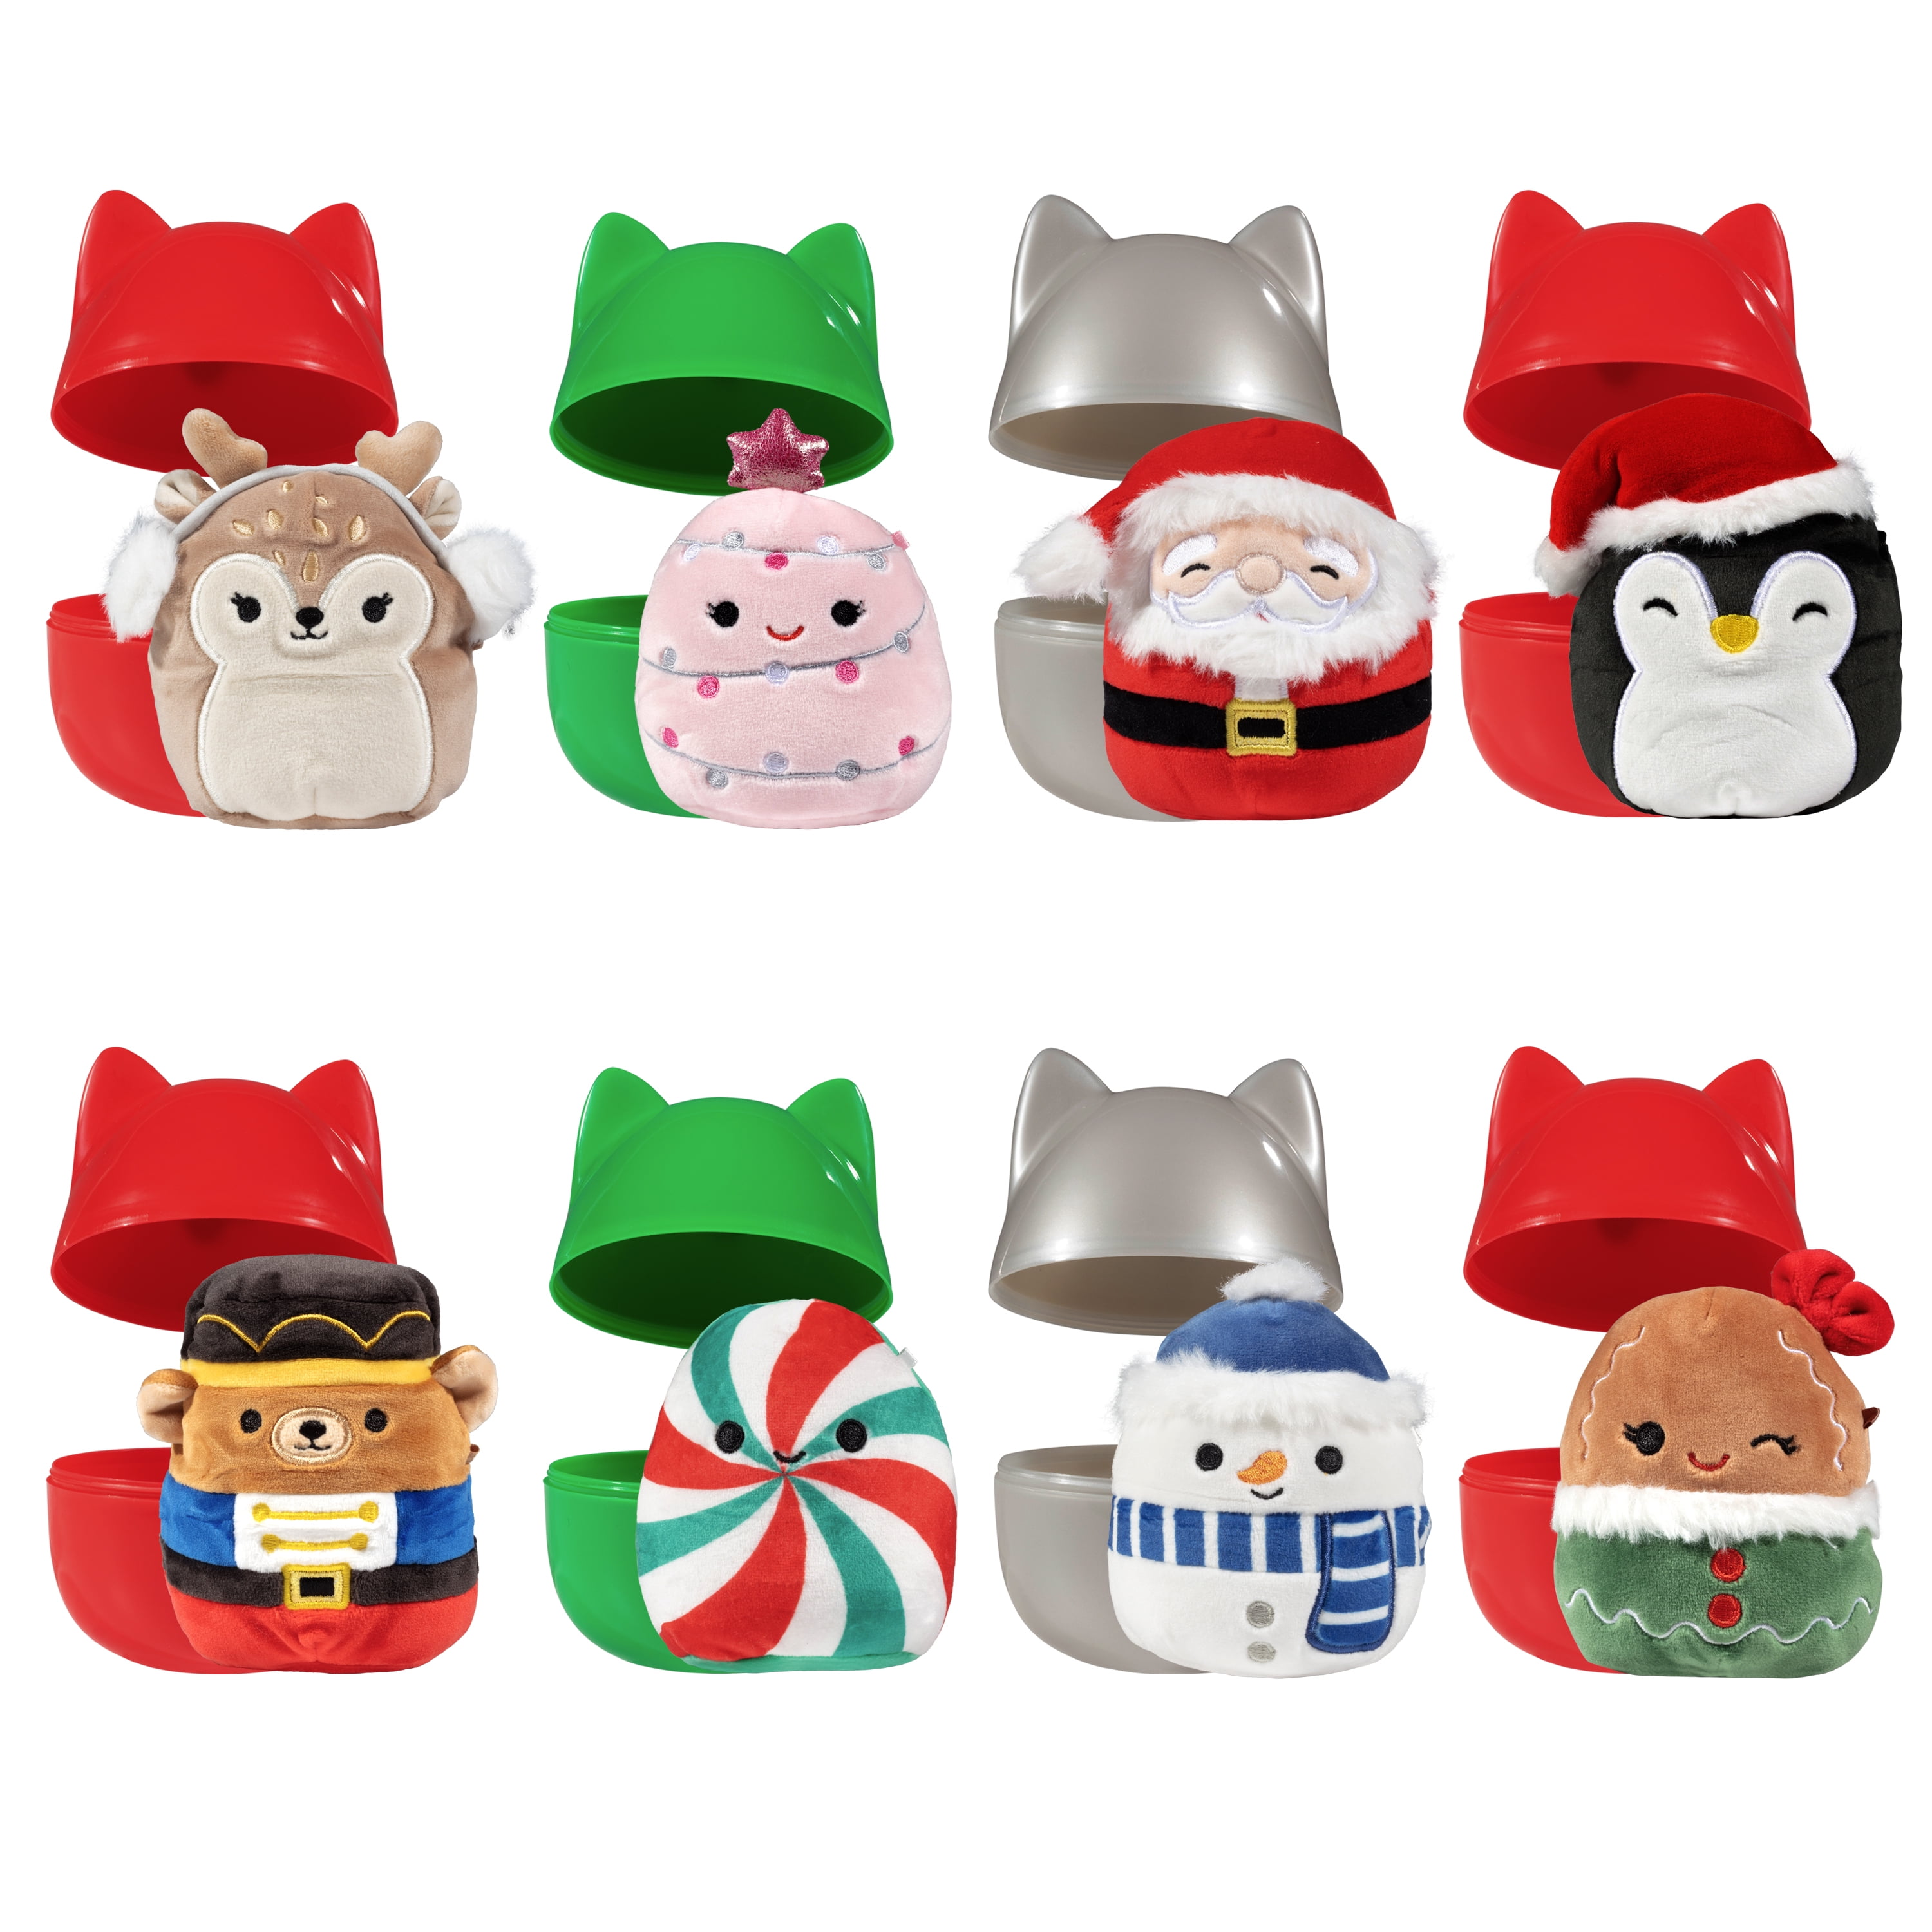 Squishmallow Winter Holiday 8 Pack 4 Inch Plush Ornament Set Collection  2023 New